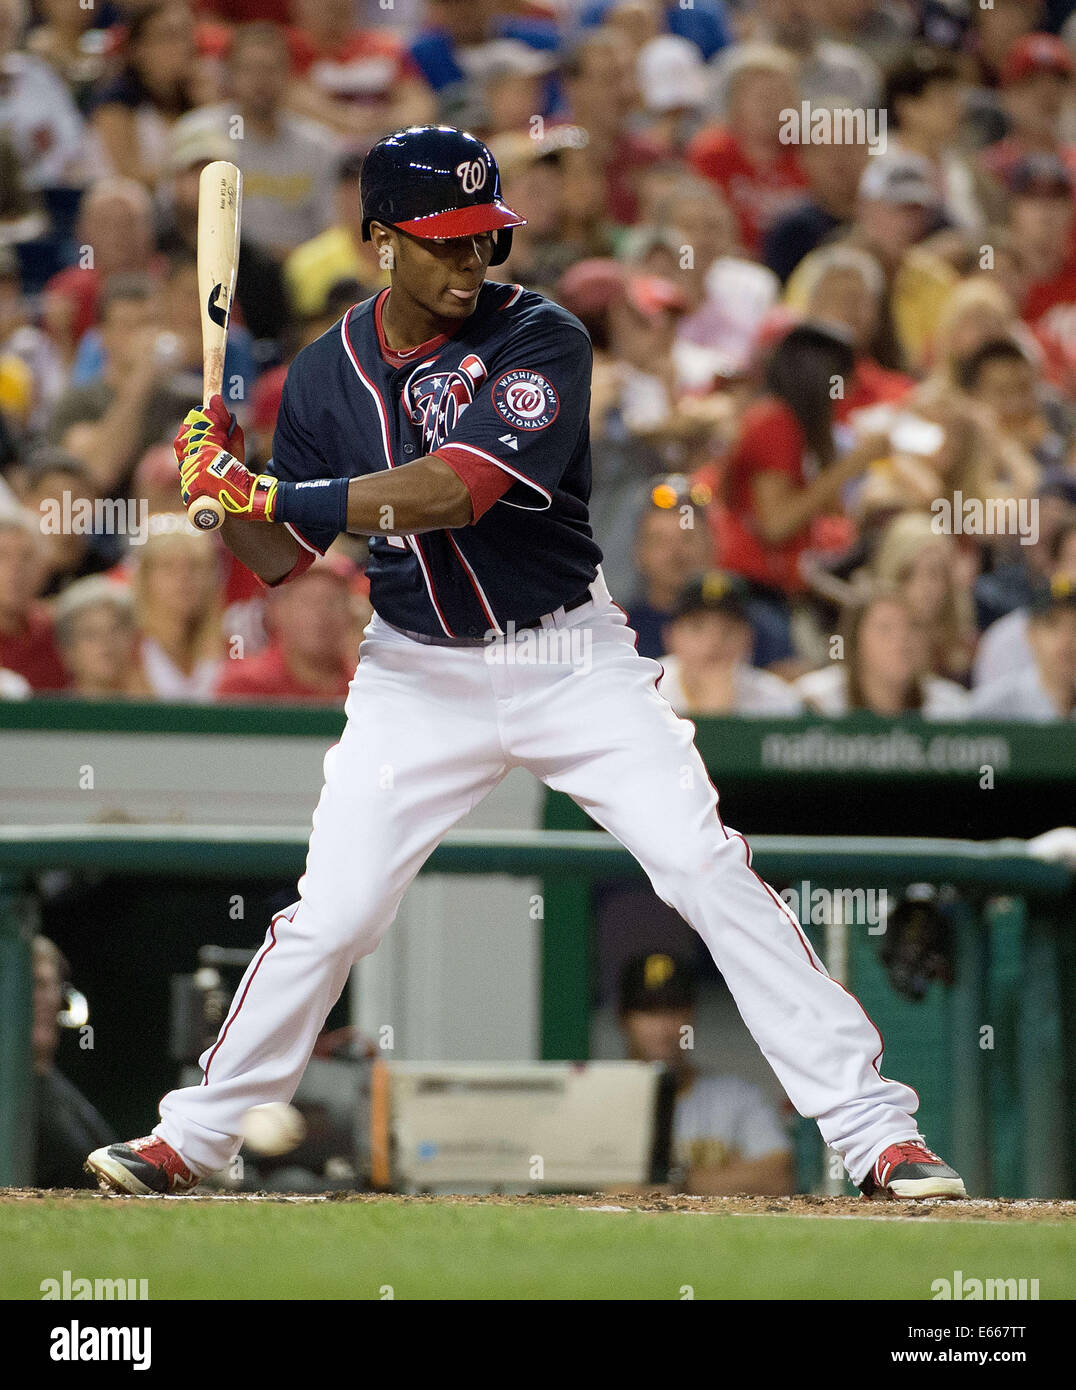 Washington, DC, USA. 15th Aug, 2014. Washington Nationals right fielder Michael Taylor (18) at bat against the Pittsburgh Pirates during their game at Nationals Park in Washington, D.C, Friday, August 15, 2014. Credit:  Harry E. Walker/ZUMA Wire/Alamy Live News Stock Photo